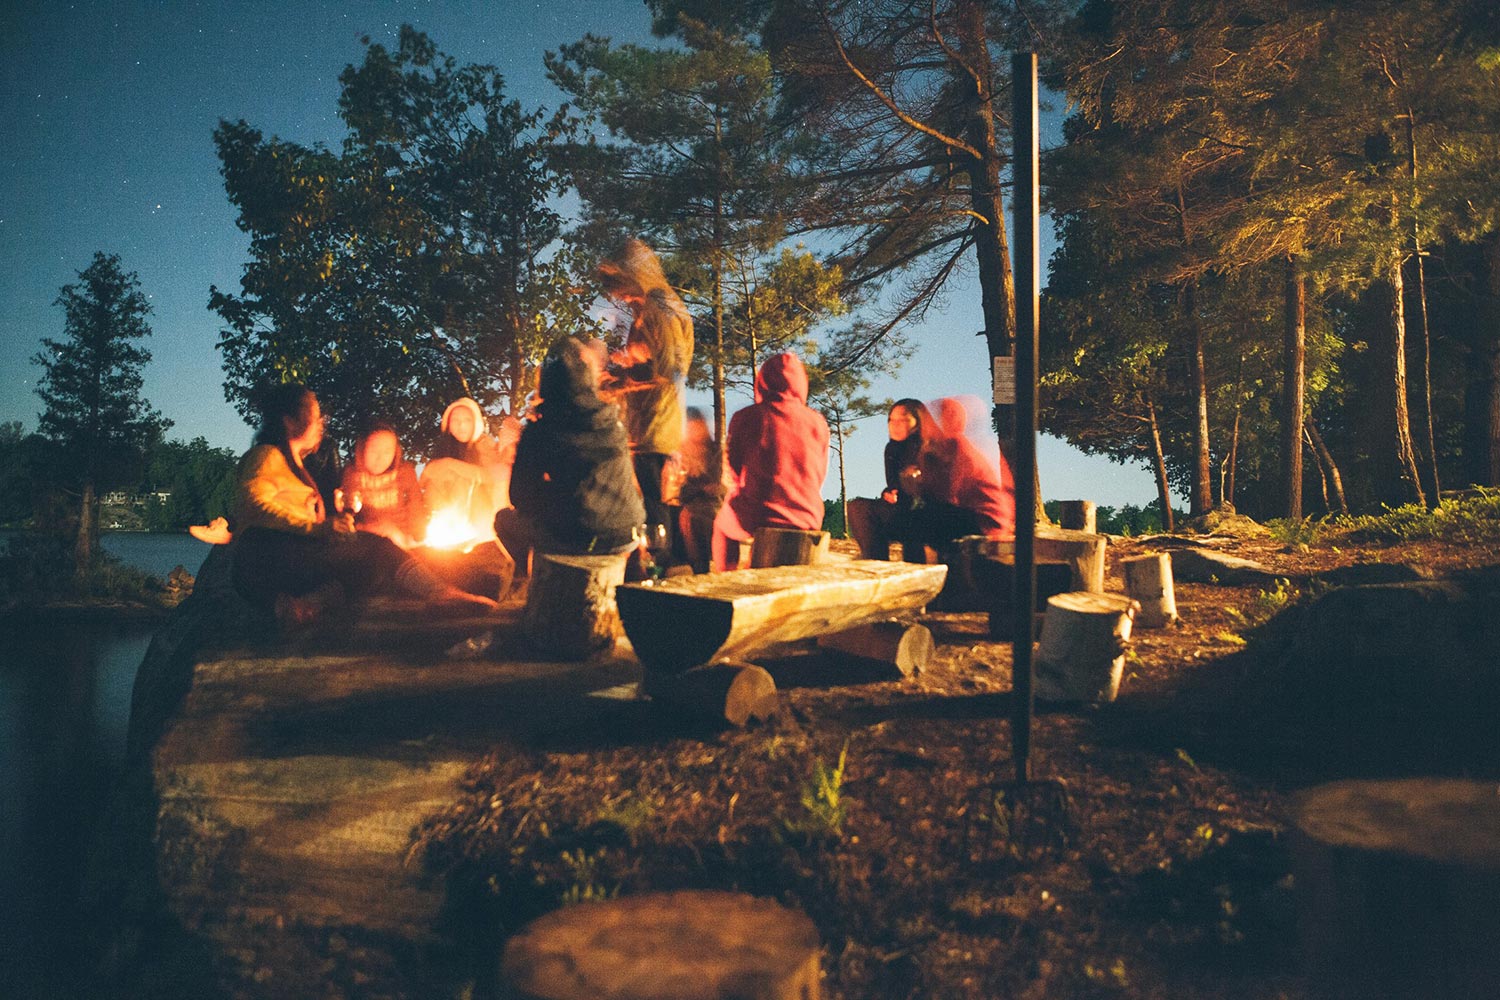 a group of people sitting around a campfire at dusk